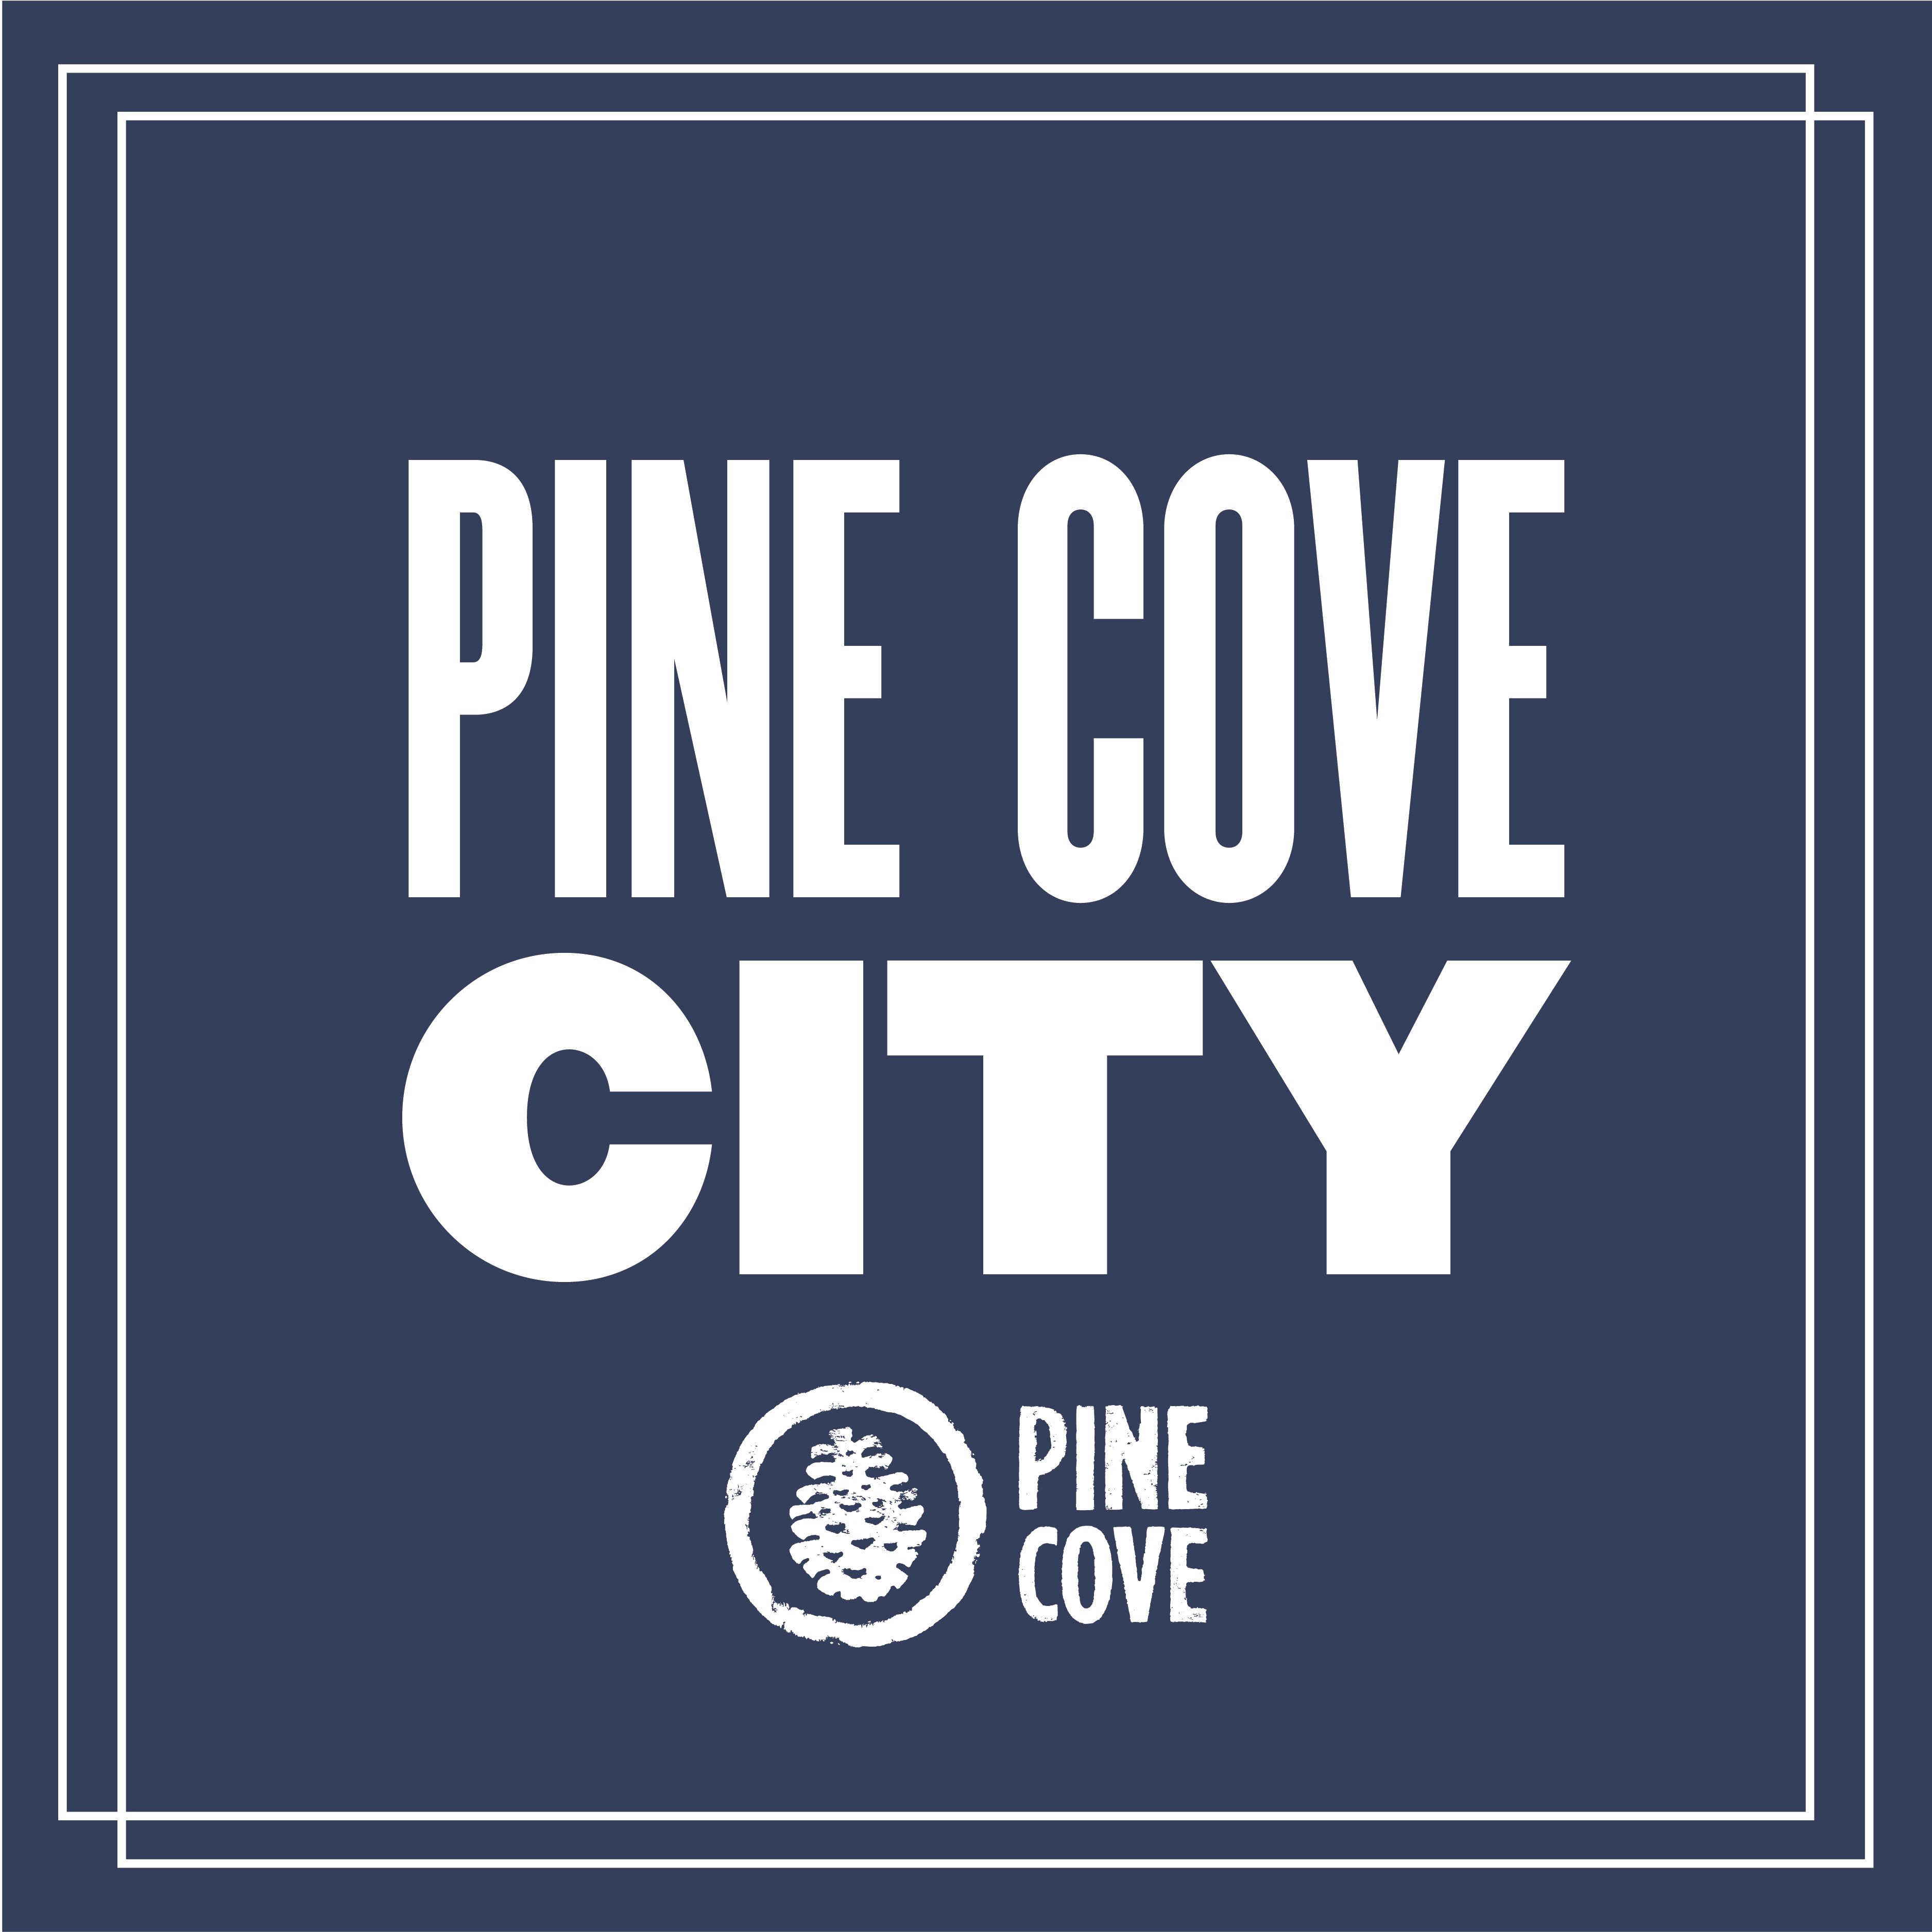 Pine_Cove_City_Square_5.png